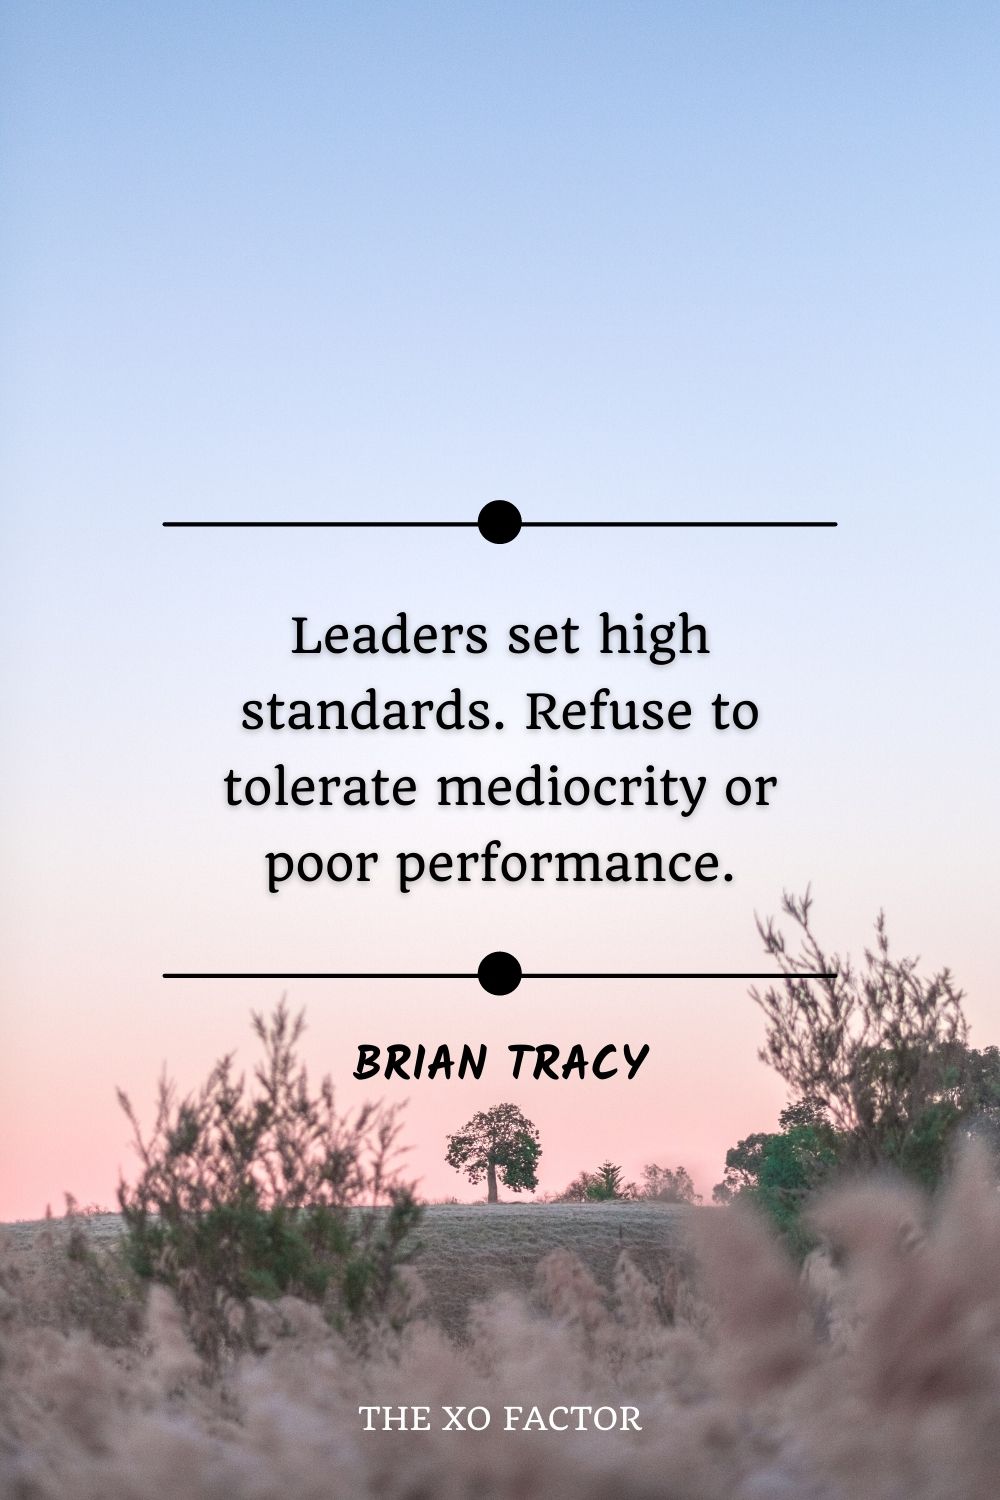 Leaders set high standards. Refuse to tolerate mediocrity or poor performance.” – Brian Tracy